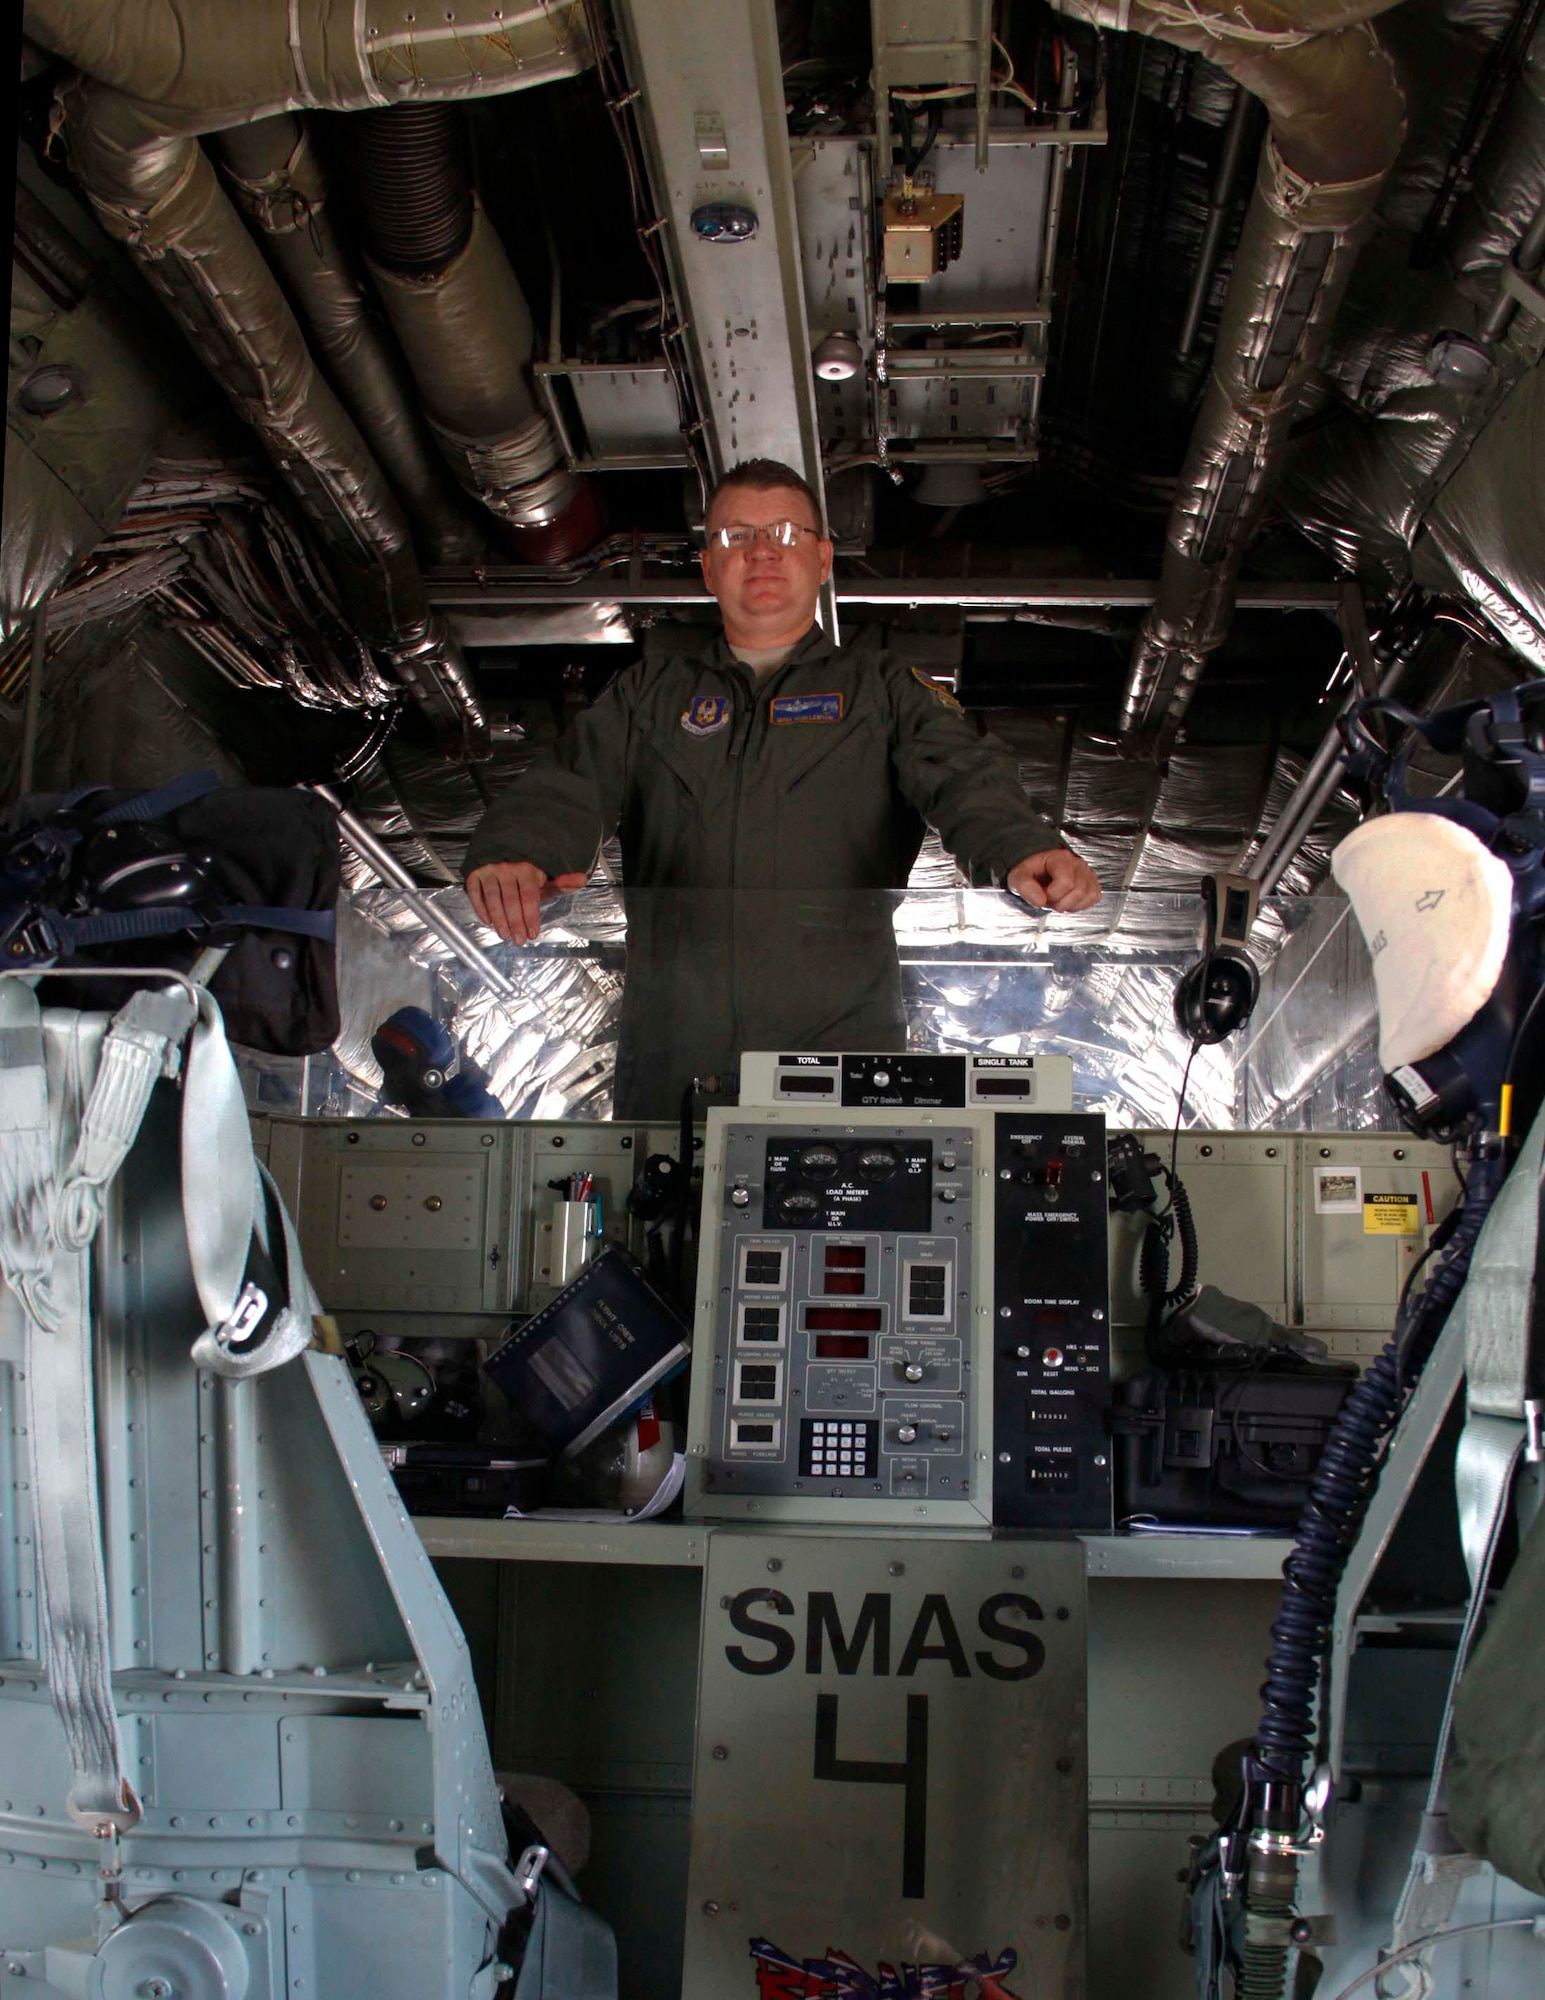 Master Sgt. Rich Lawton, engineer from the 910th Airlift Wing in Youngstown, Ohio, stands in the cargo bay of the C-130 plane at Homestead Air Reserve Base, Fla., July 31.  Lawton is a member of the crew that performed the aerial spray mission to reduce the mosquito population in Homestead and the surrounding Miami-Dade County. (U.S. Air Force photo by/Senior Airman Jaimi L. Upthegrove)